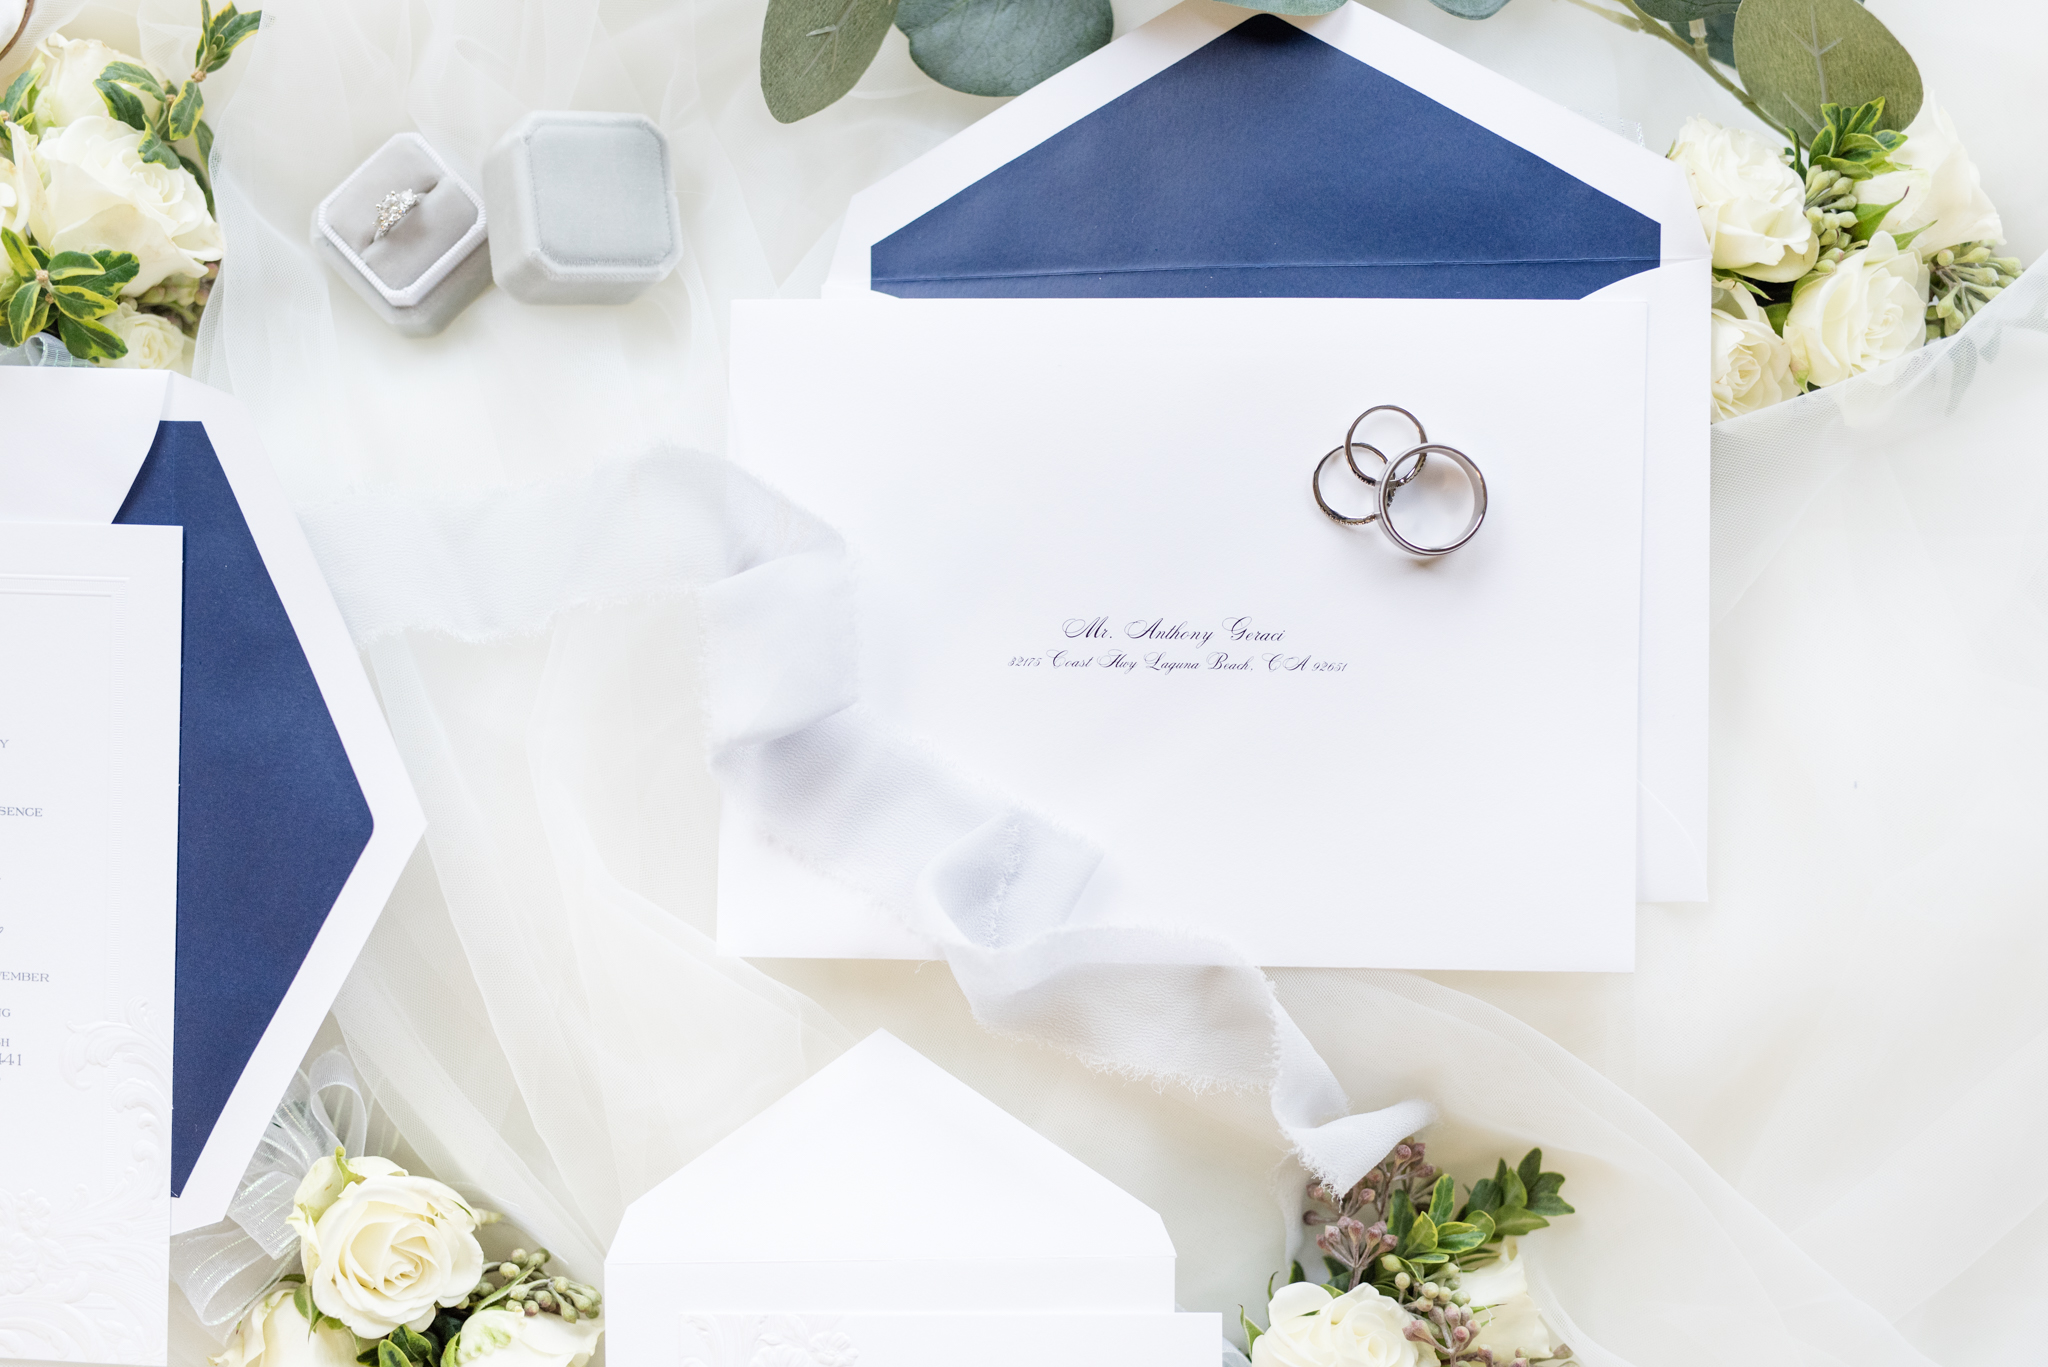 Wedding invitations and rings.